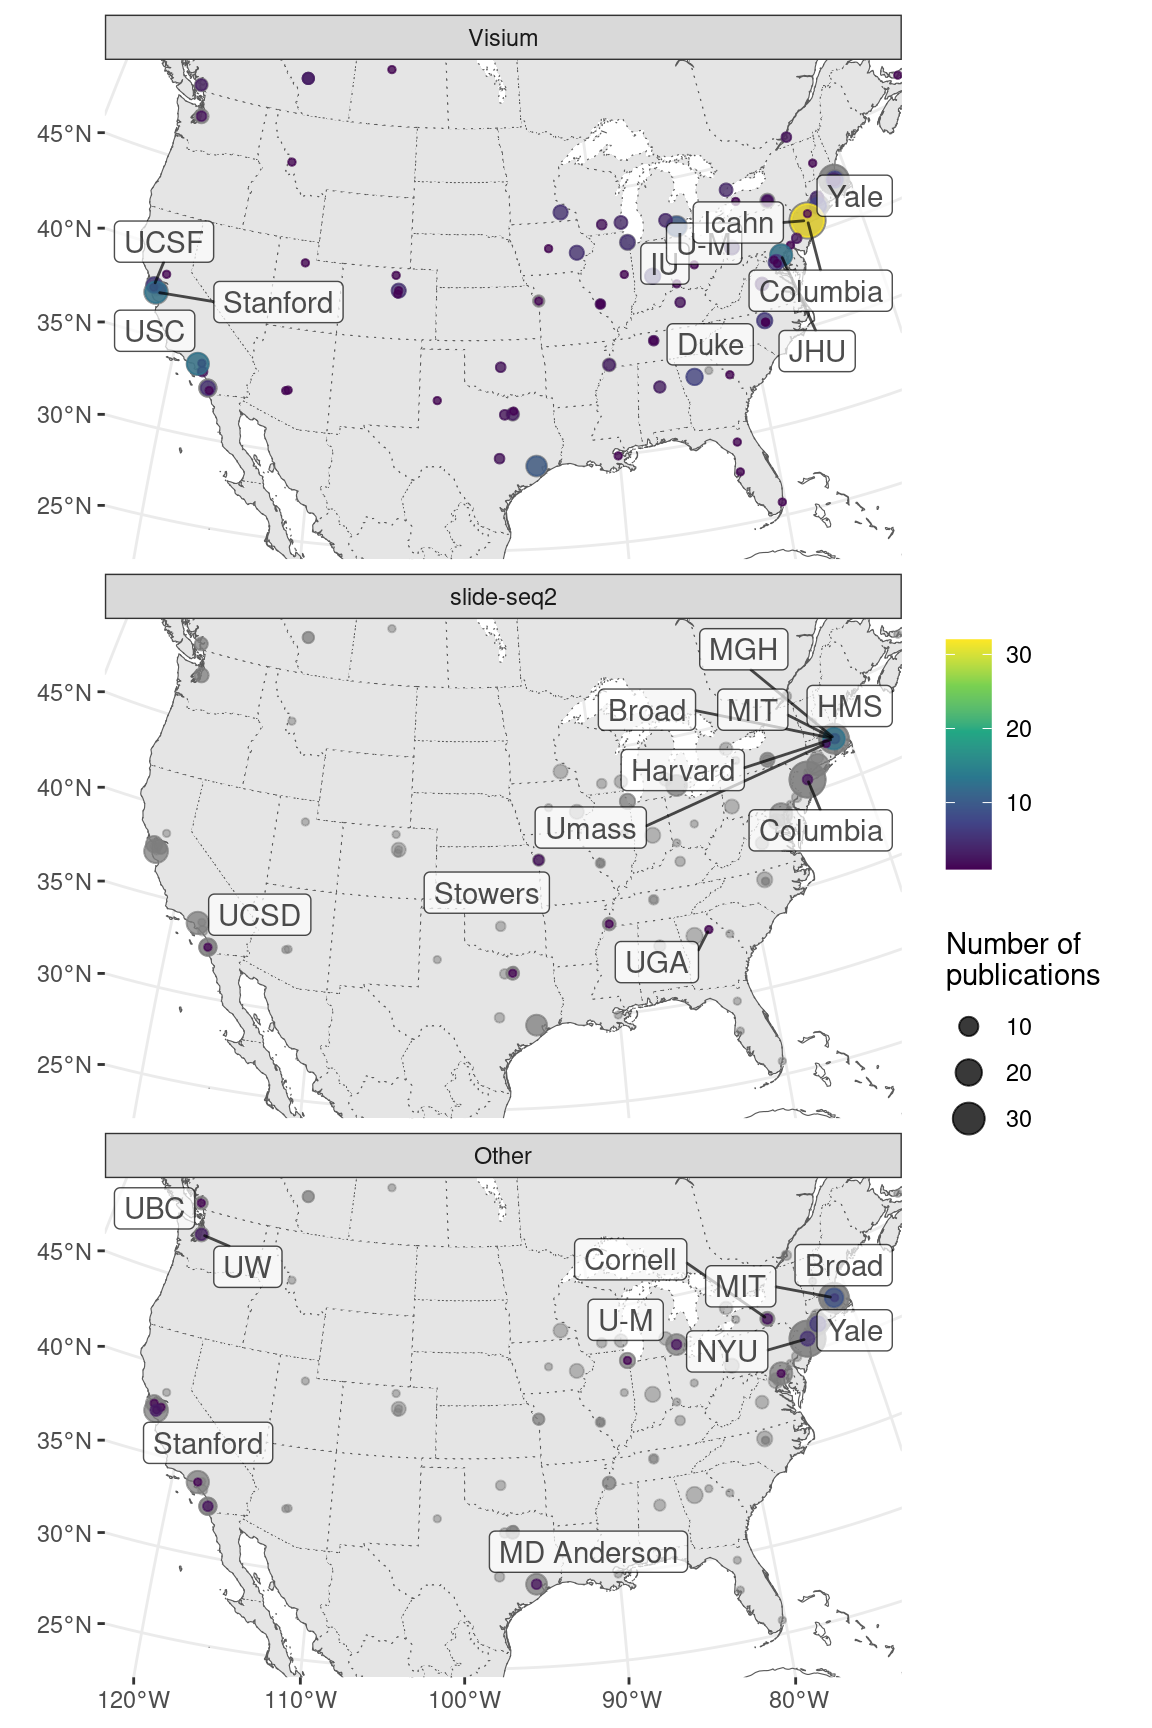 Cities and institutions using ST and Visium around continental US. Preprints are included.